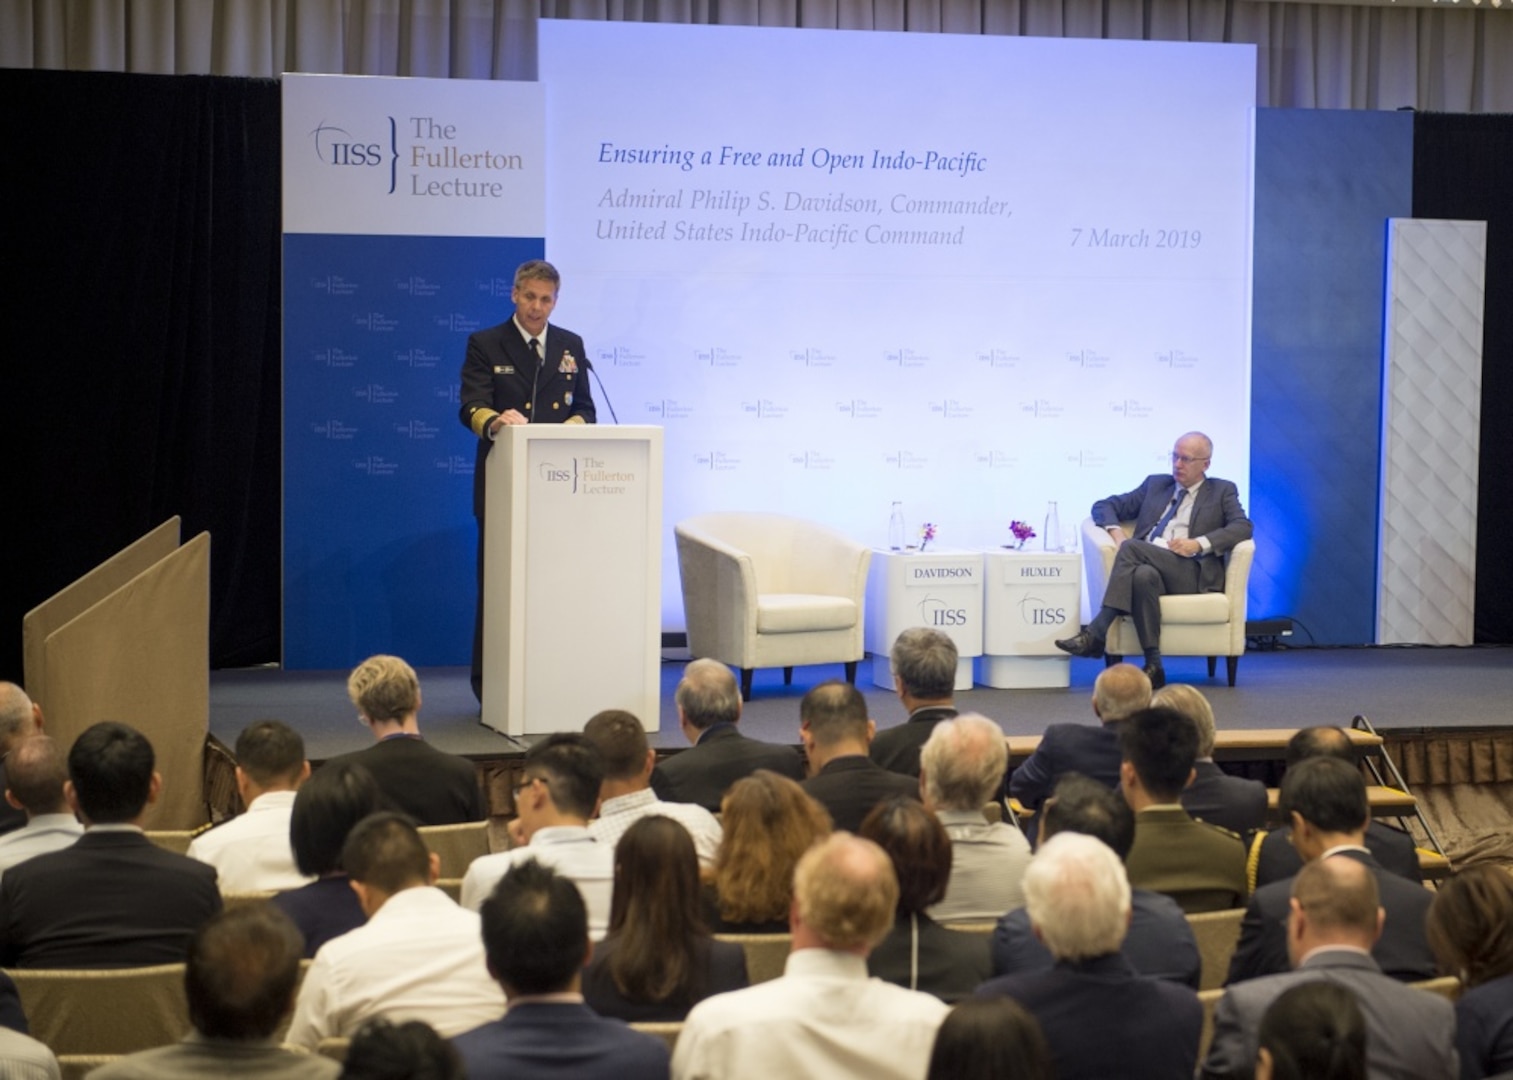 FULLERTON LECTURE SERIES (Hosted by IISS) 
On “Ensuring a Free and Open Indo-Pacific”